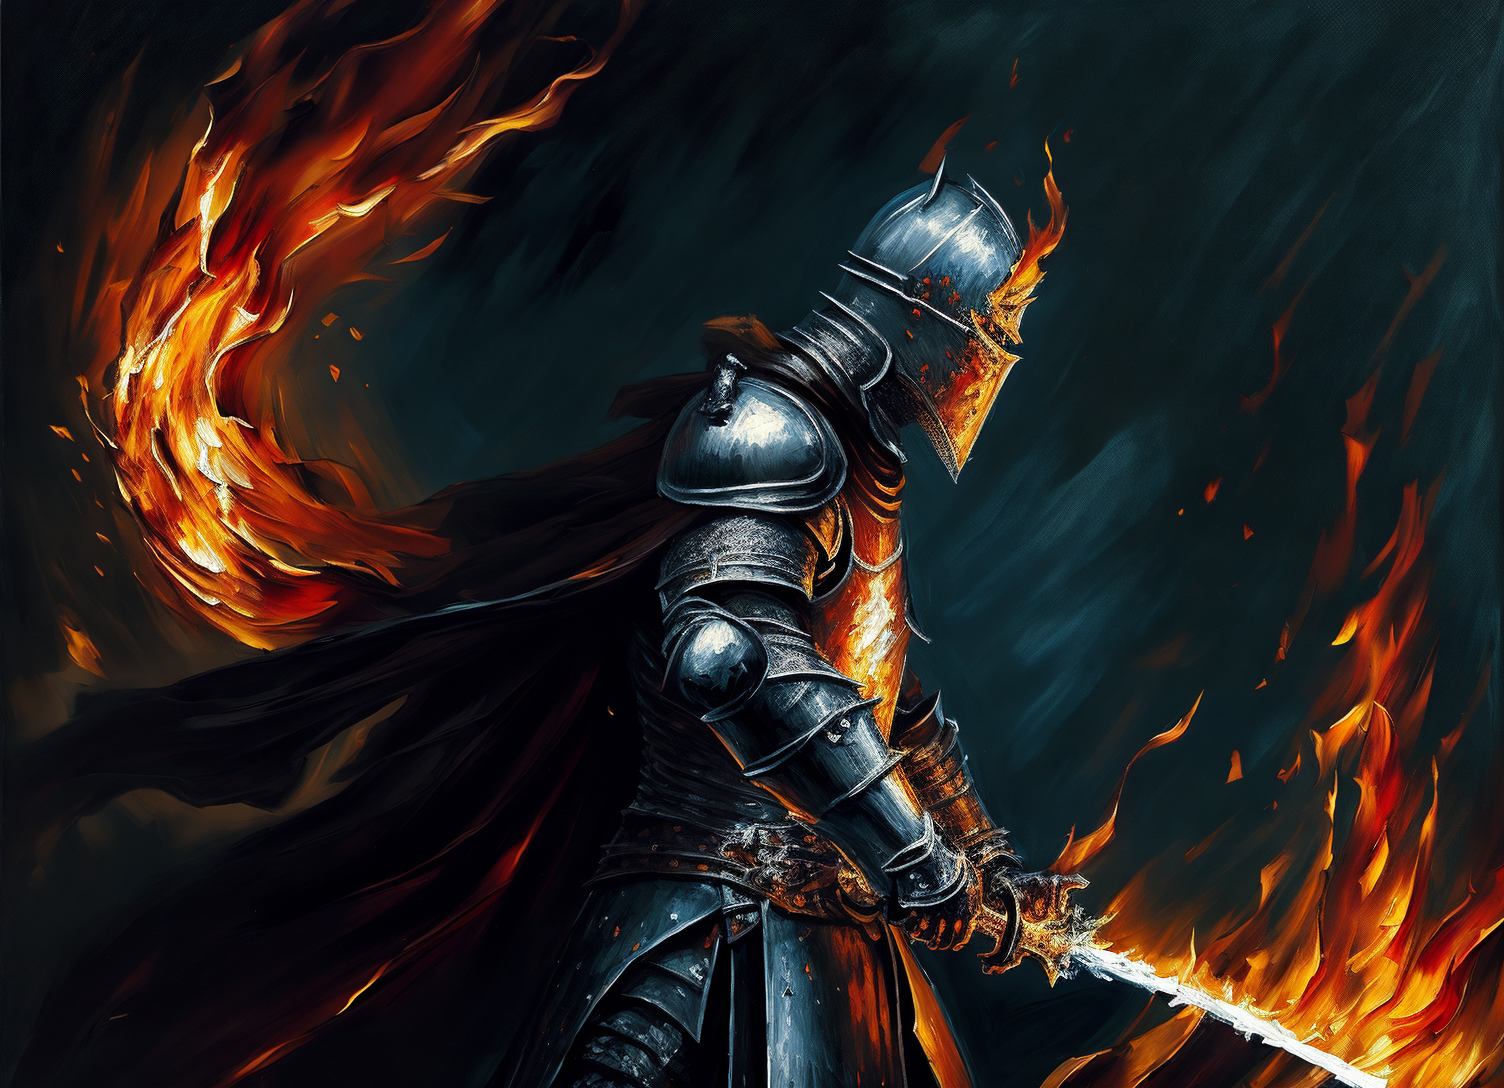 (speed oil painting) of a knight wielding a flaming sword in darkness, ominous, medieval, dark fantasy, cape